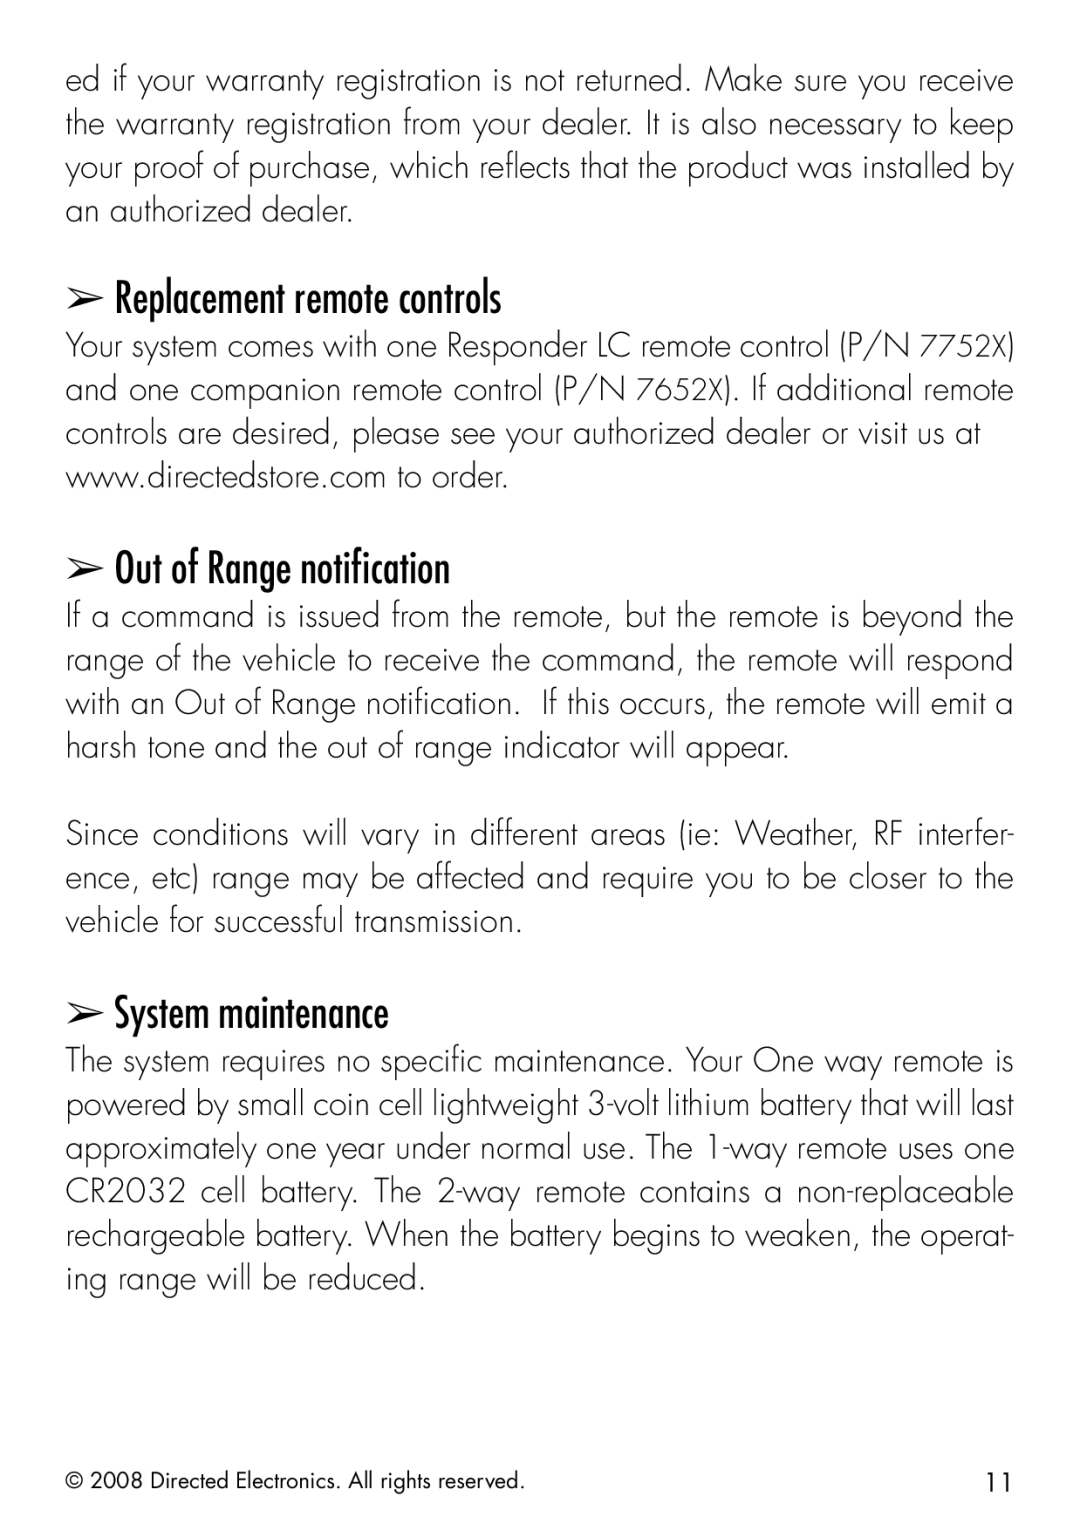 Clifford 50.7X manual Replacement remote controls Out of Range notiﬁcation, System maintenance 